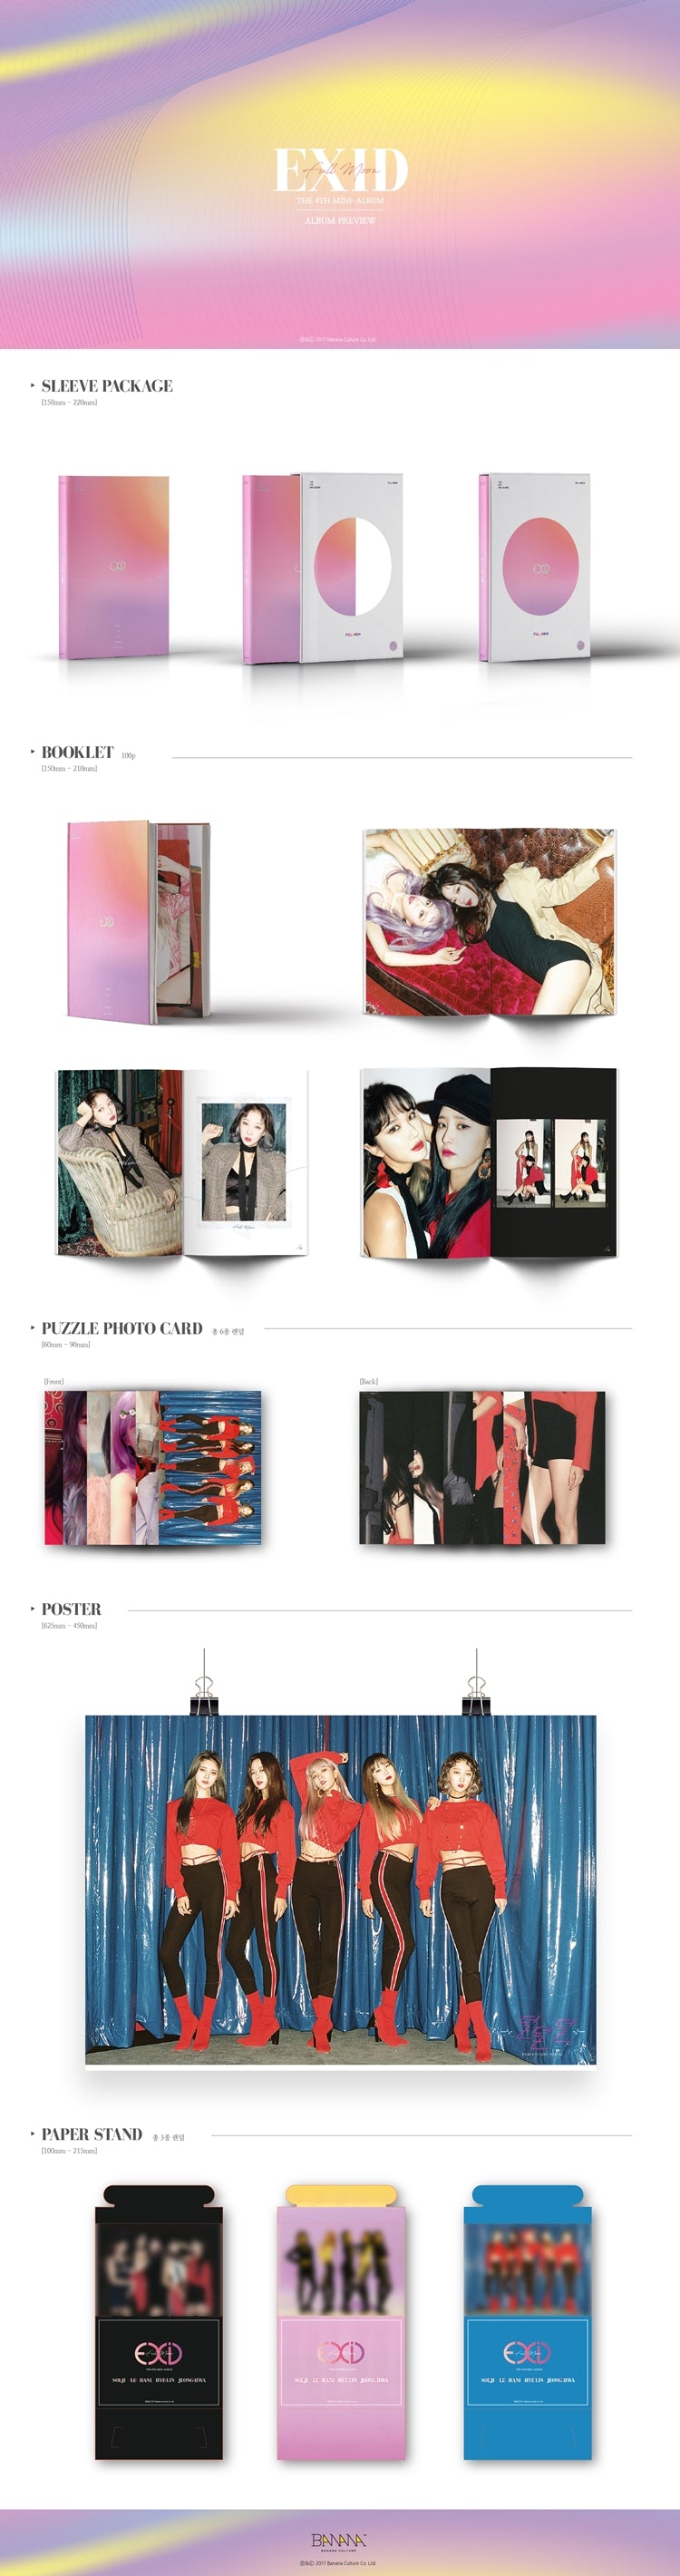 1 CD
1 Booklet (100 pages)
1 Puzzle Photo Card
1 Paper Stand